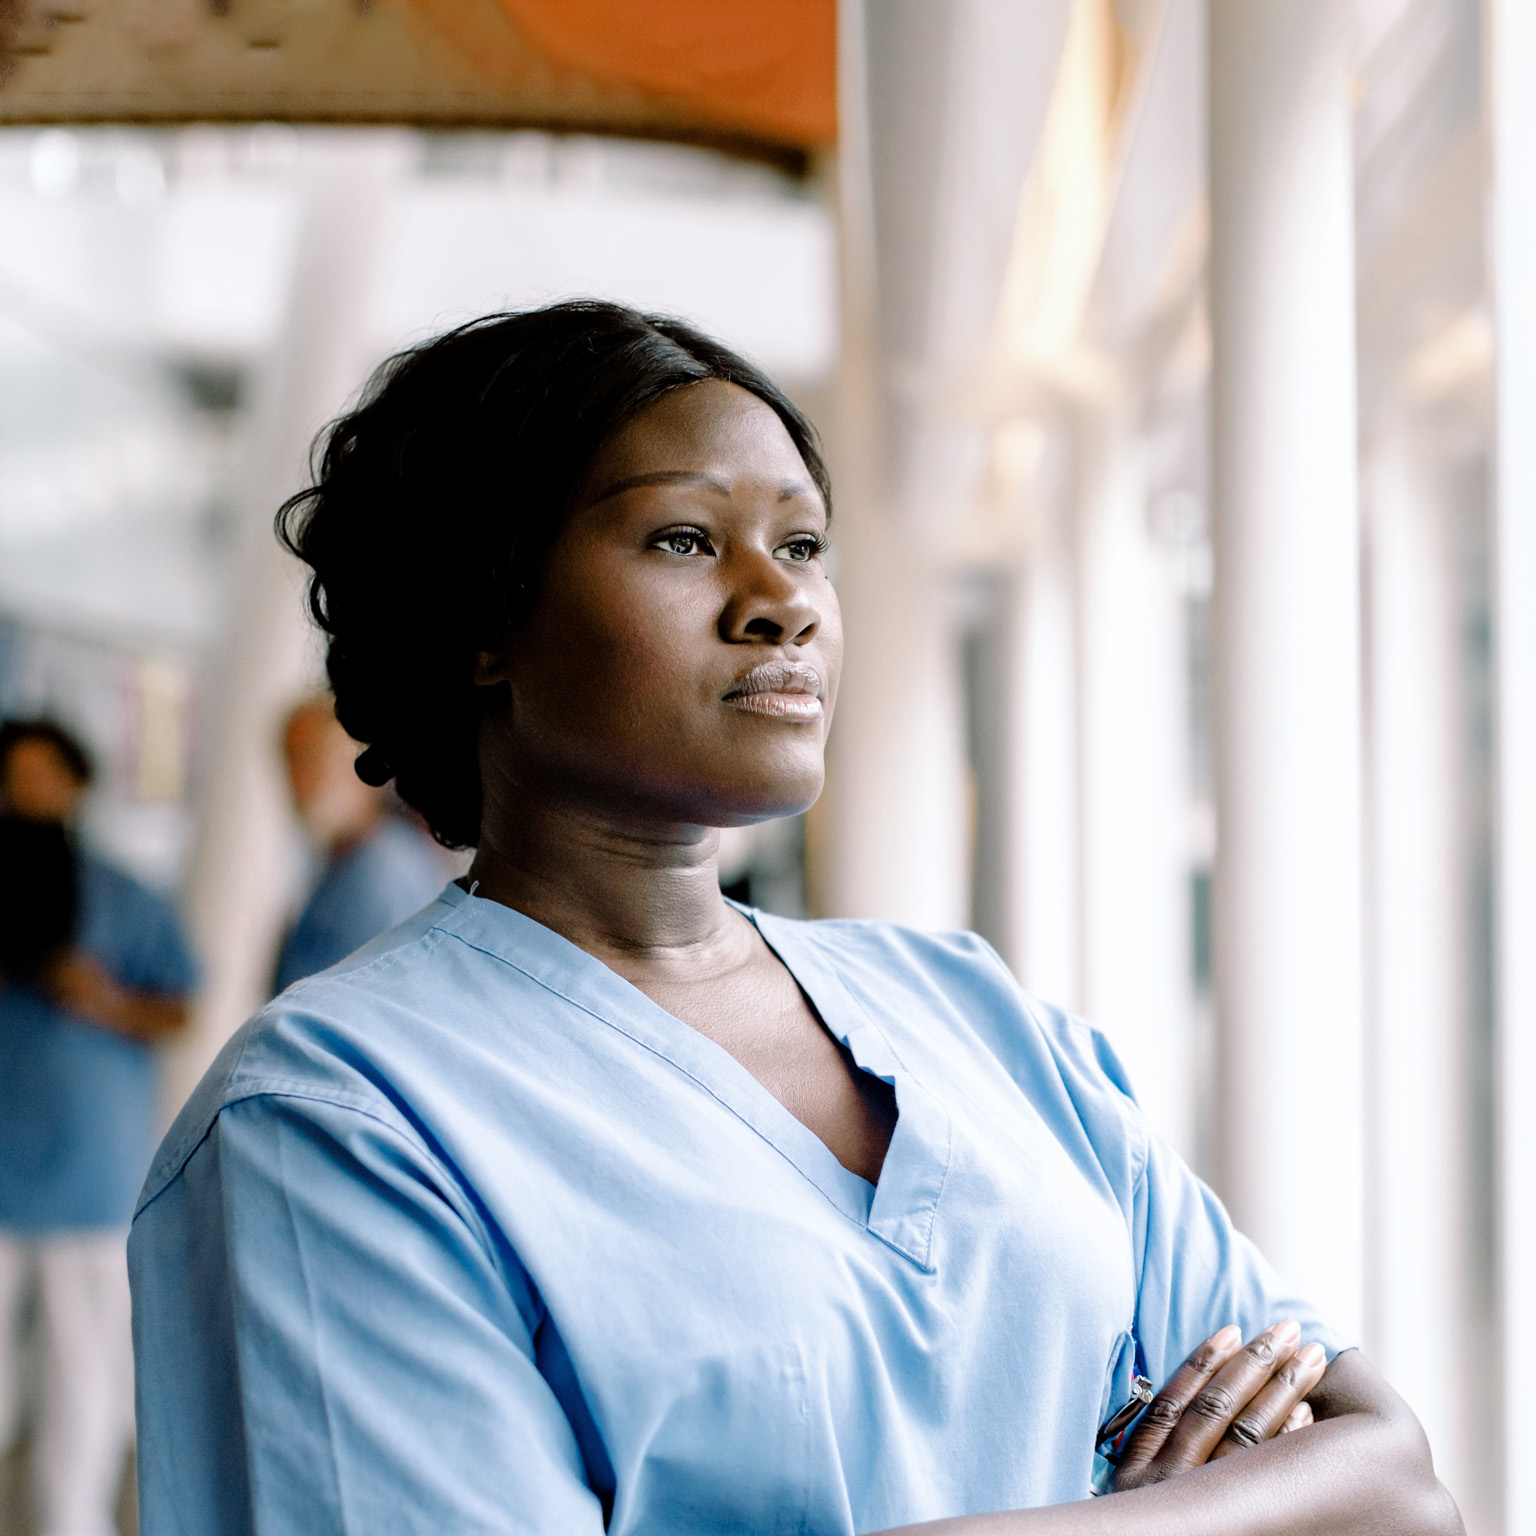 Contemplating female nurse with arms crossed looking through window in hospital